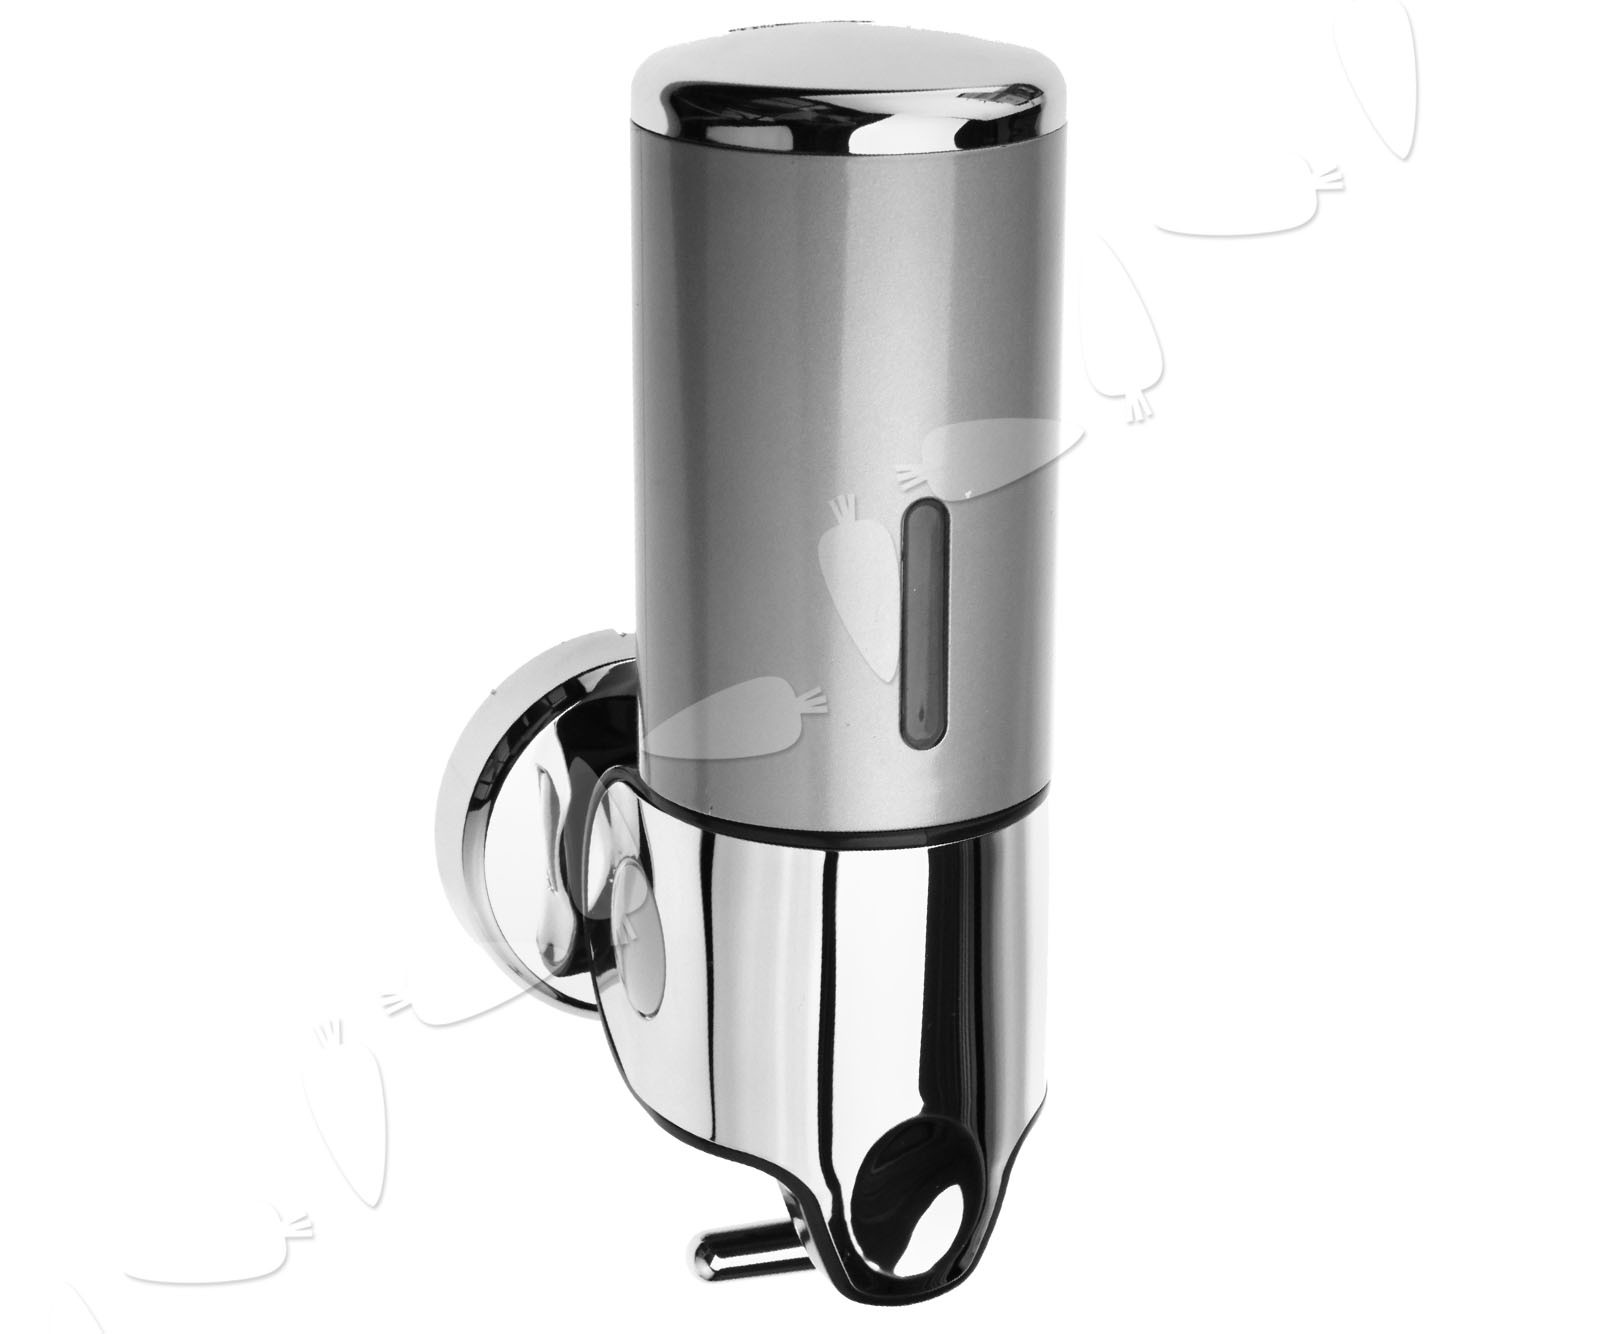 Wall Mounted Bathroom soap Dispenser Awesome 400ml Wall Mounted Bathroom Shower soap Dispenser Liquid